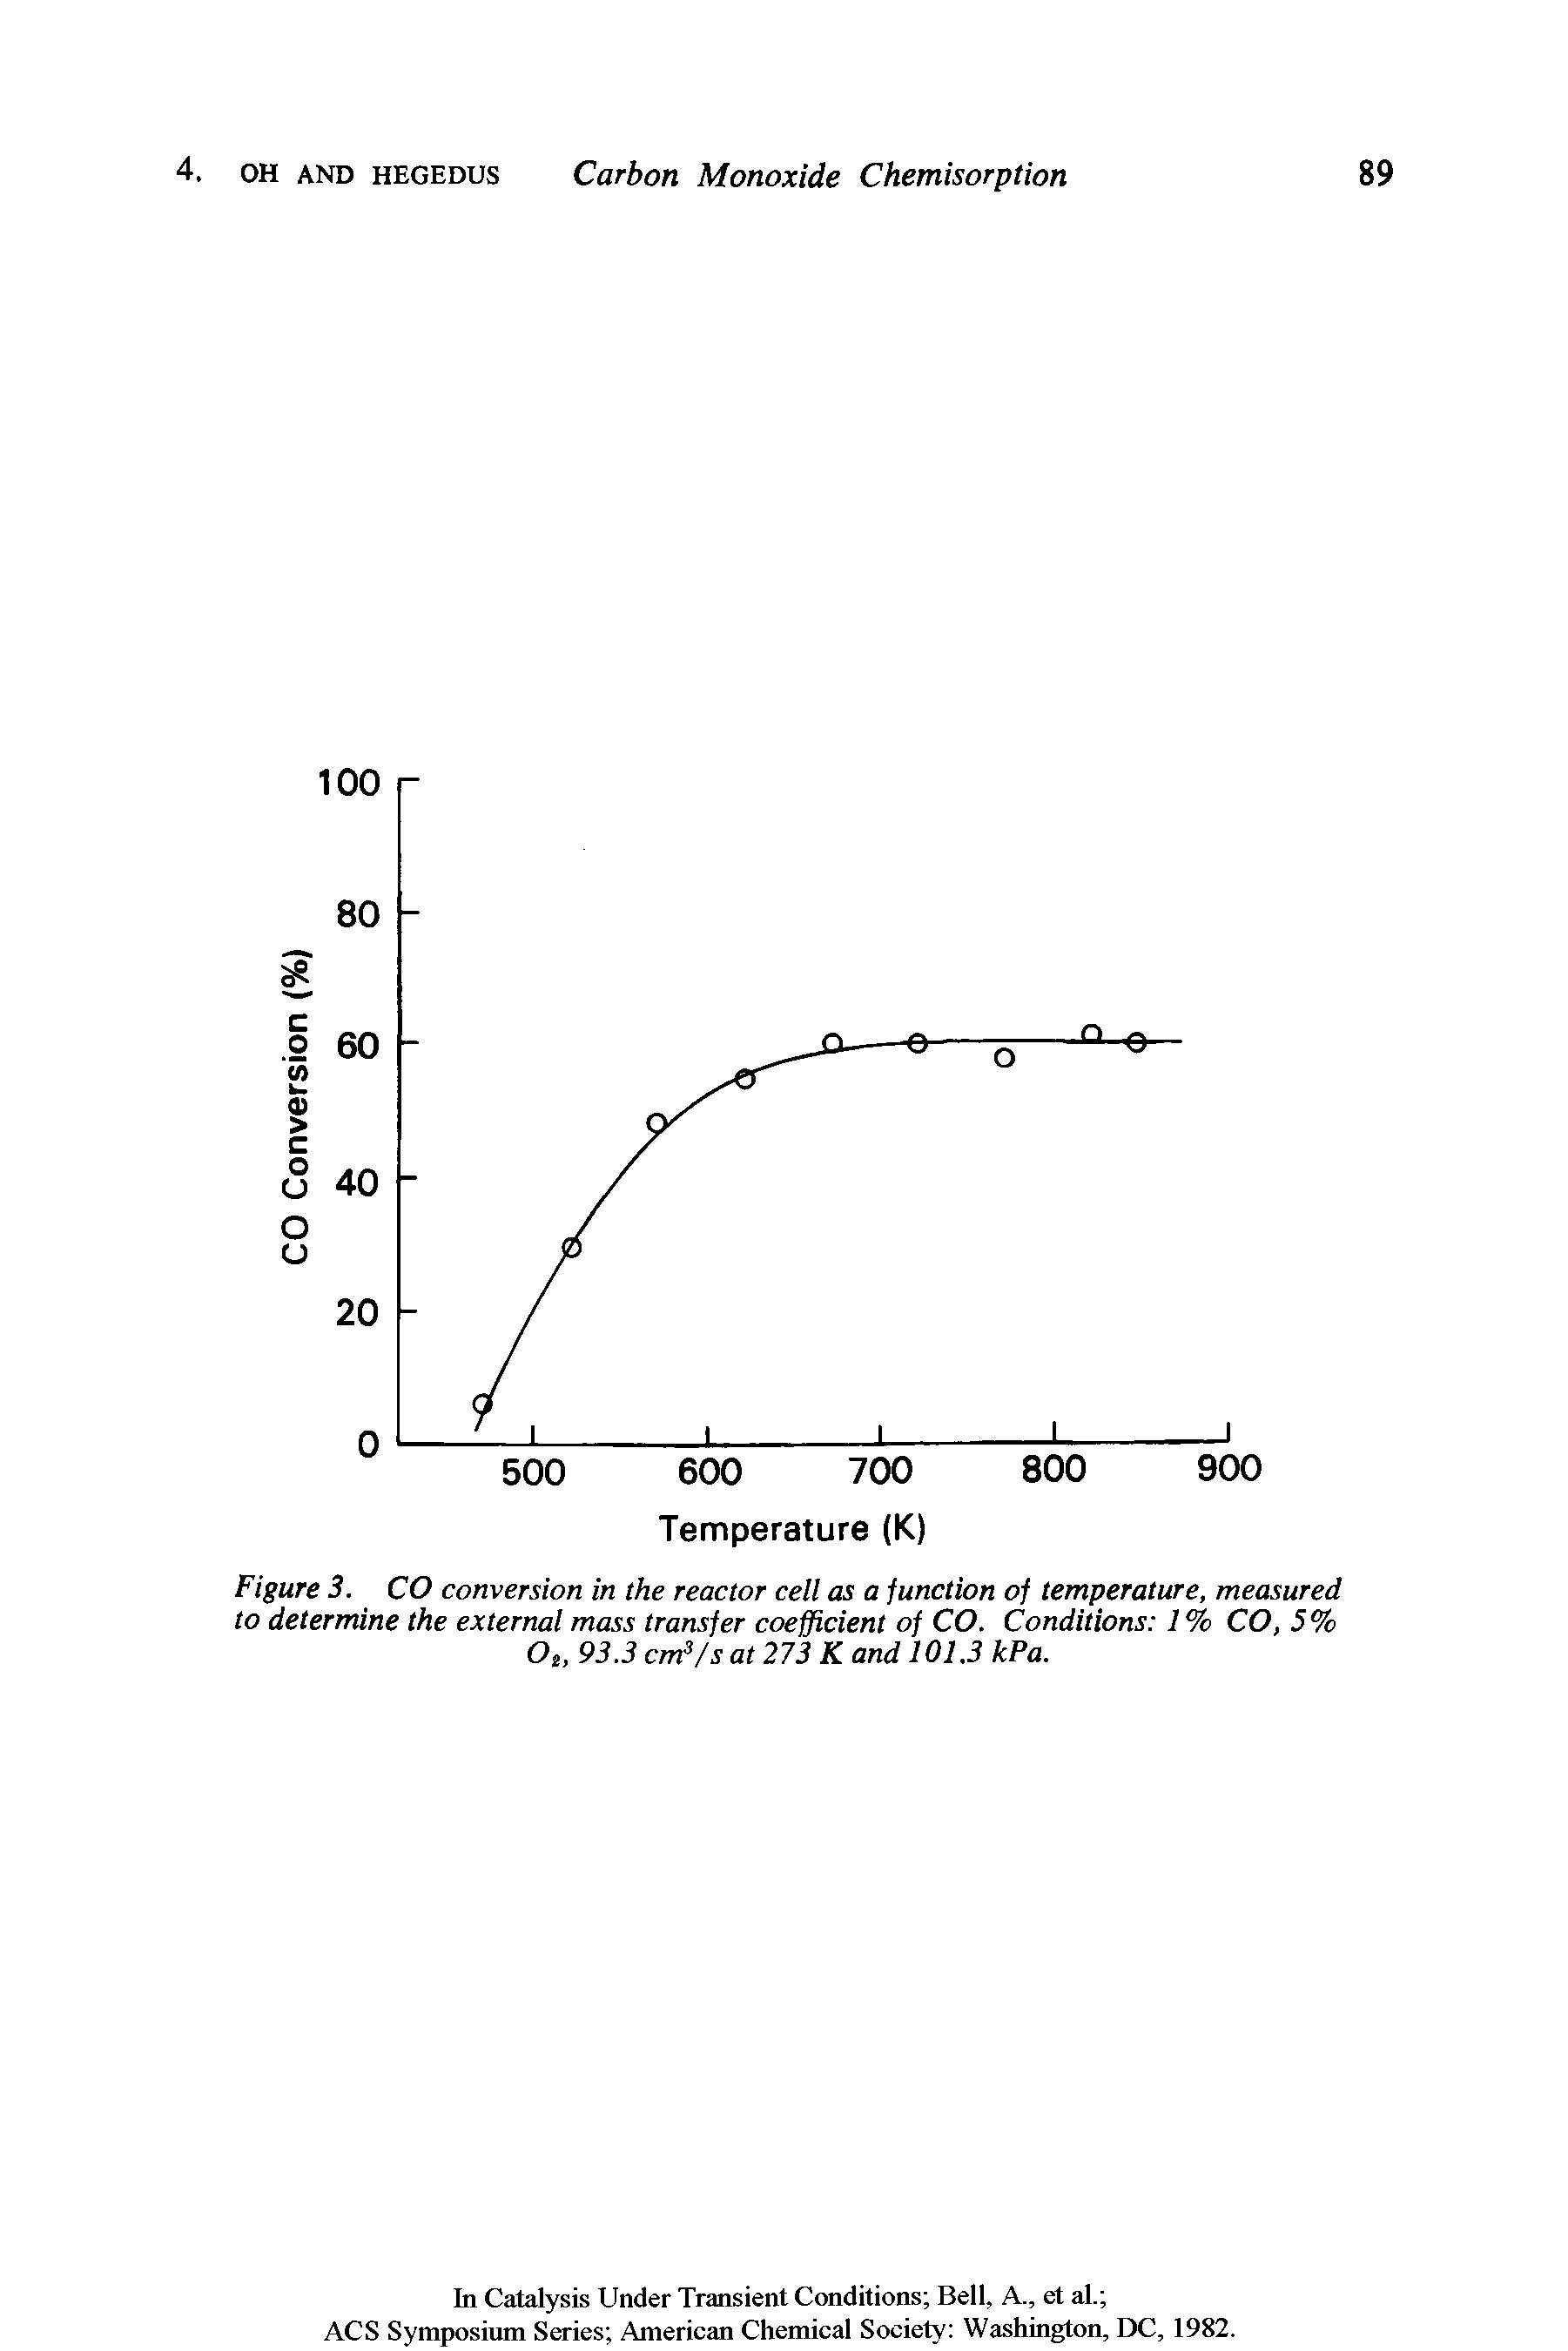 Figure 3. CO conversion in the reactor cell as a function of temperature, measured to determine the external mass transfer coefficient of CO. Conditions 1% CO, 5% 0 t 93.3 cm /s at 273 K and 101.3 kPa.